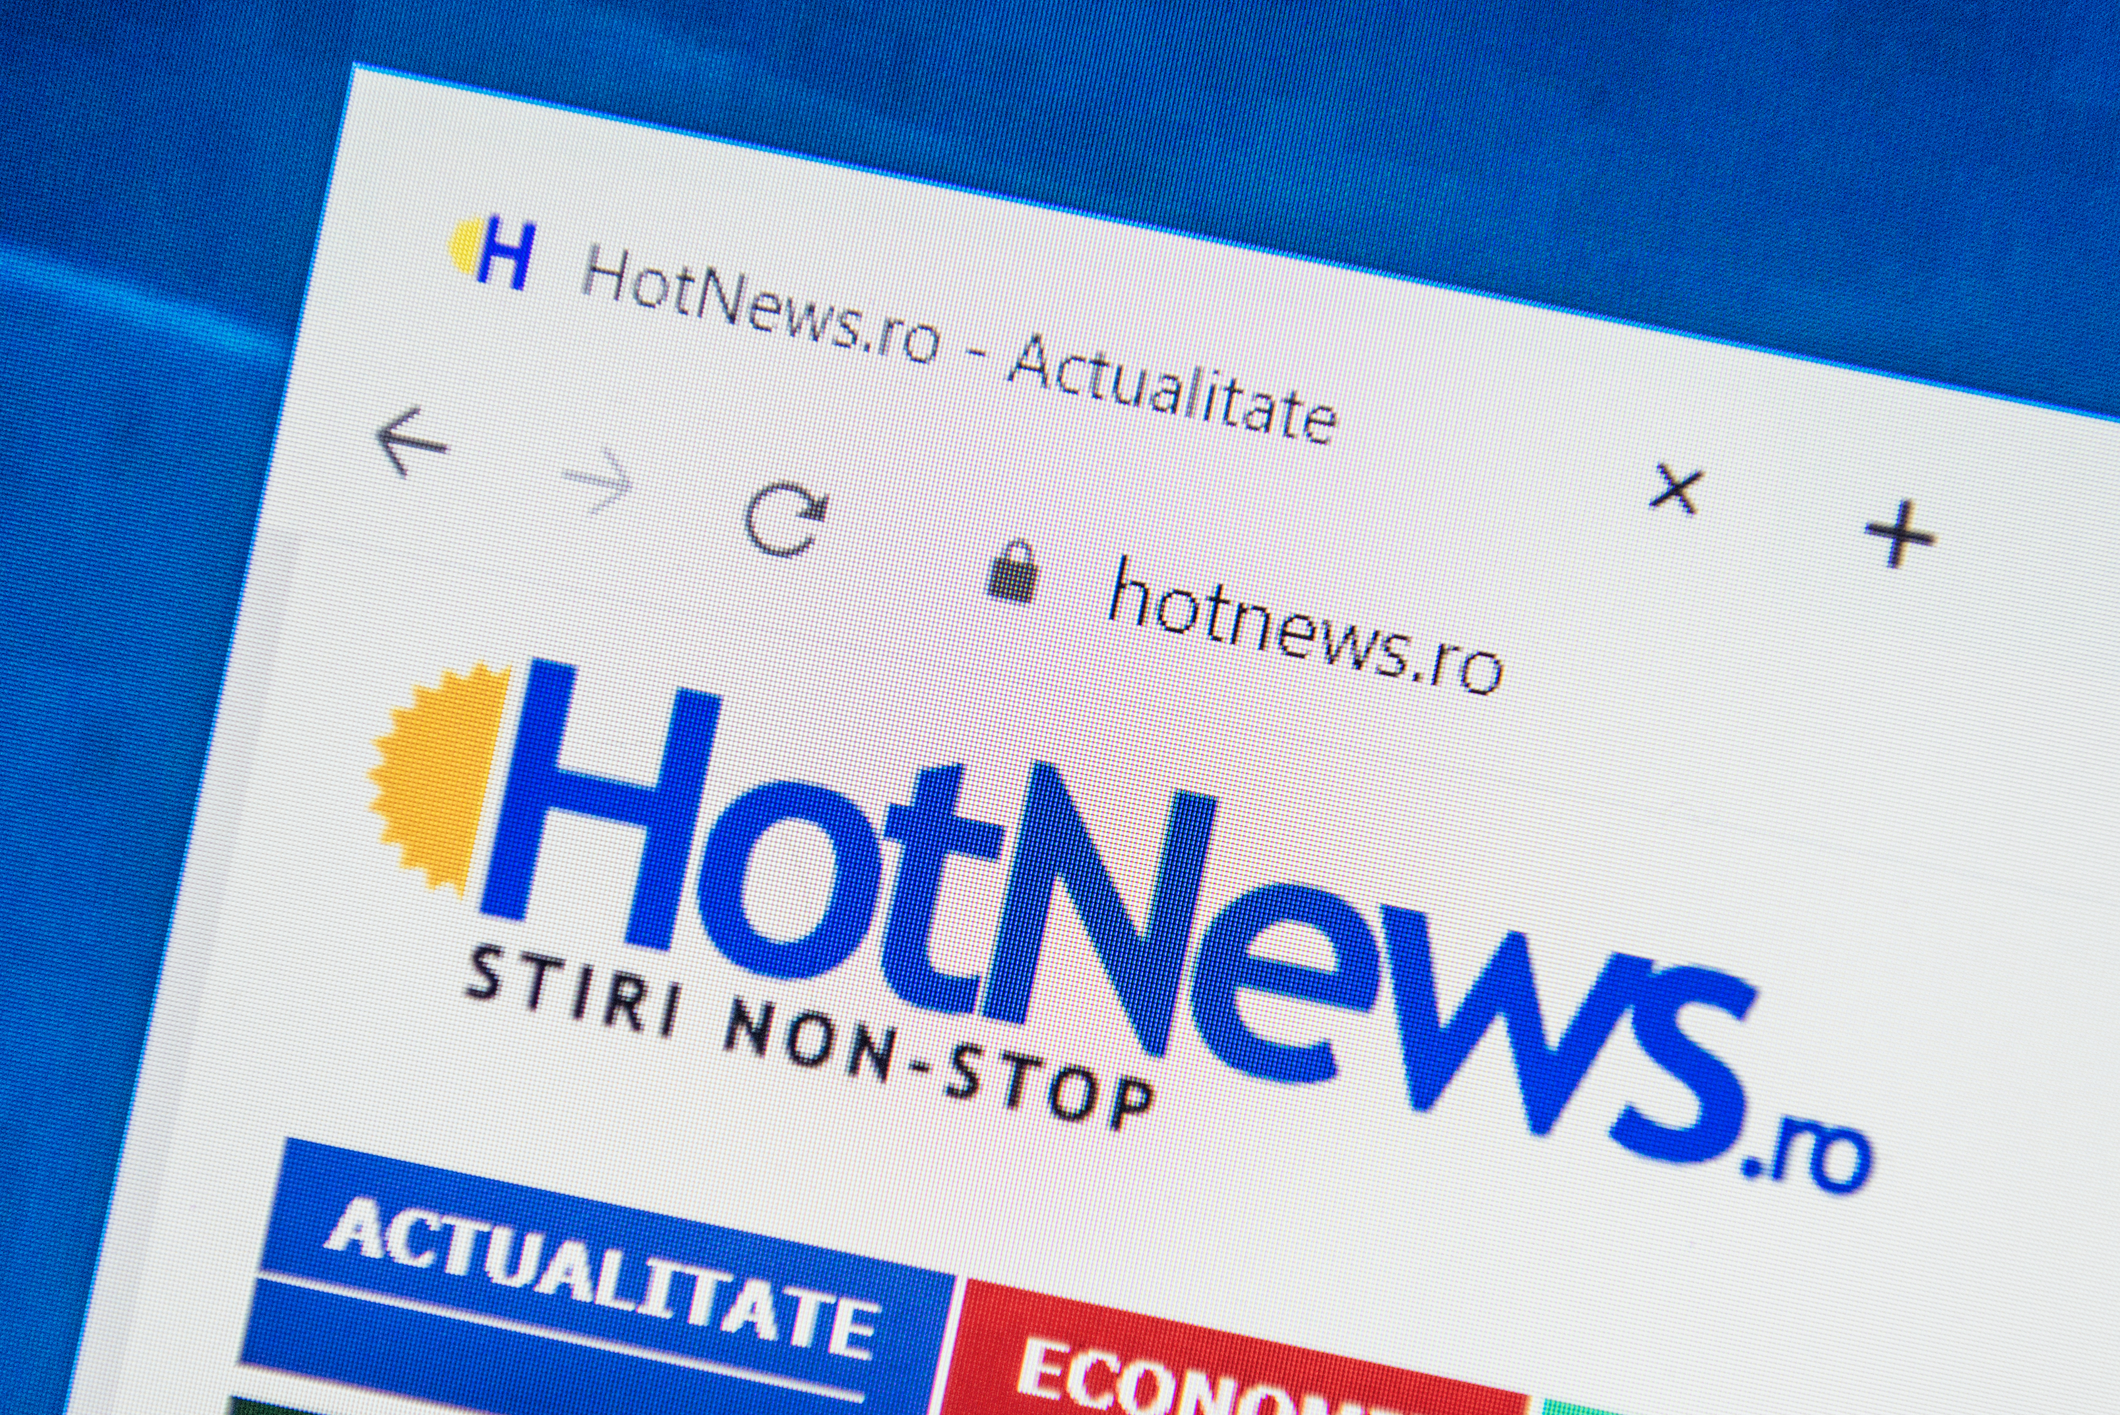 Romanian film and ad producer in talks to buy local news portal Hotnews.ro